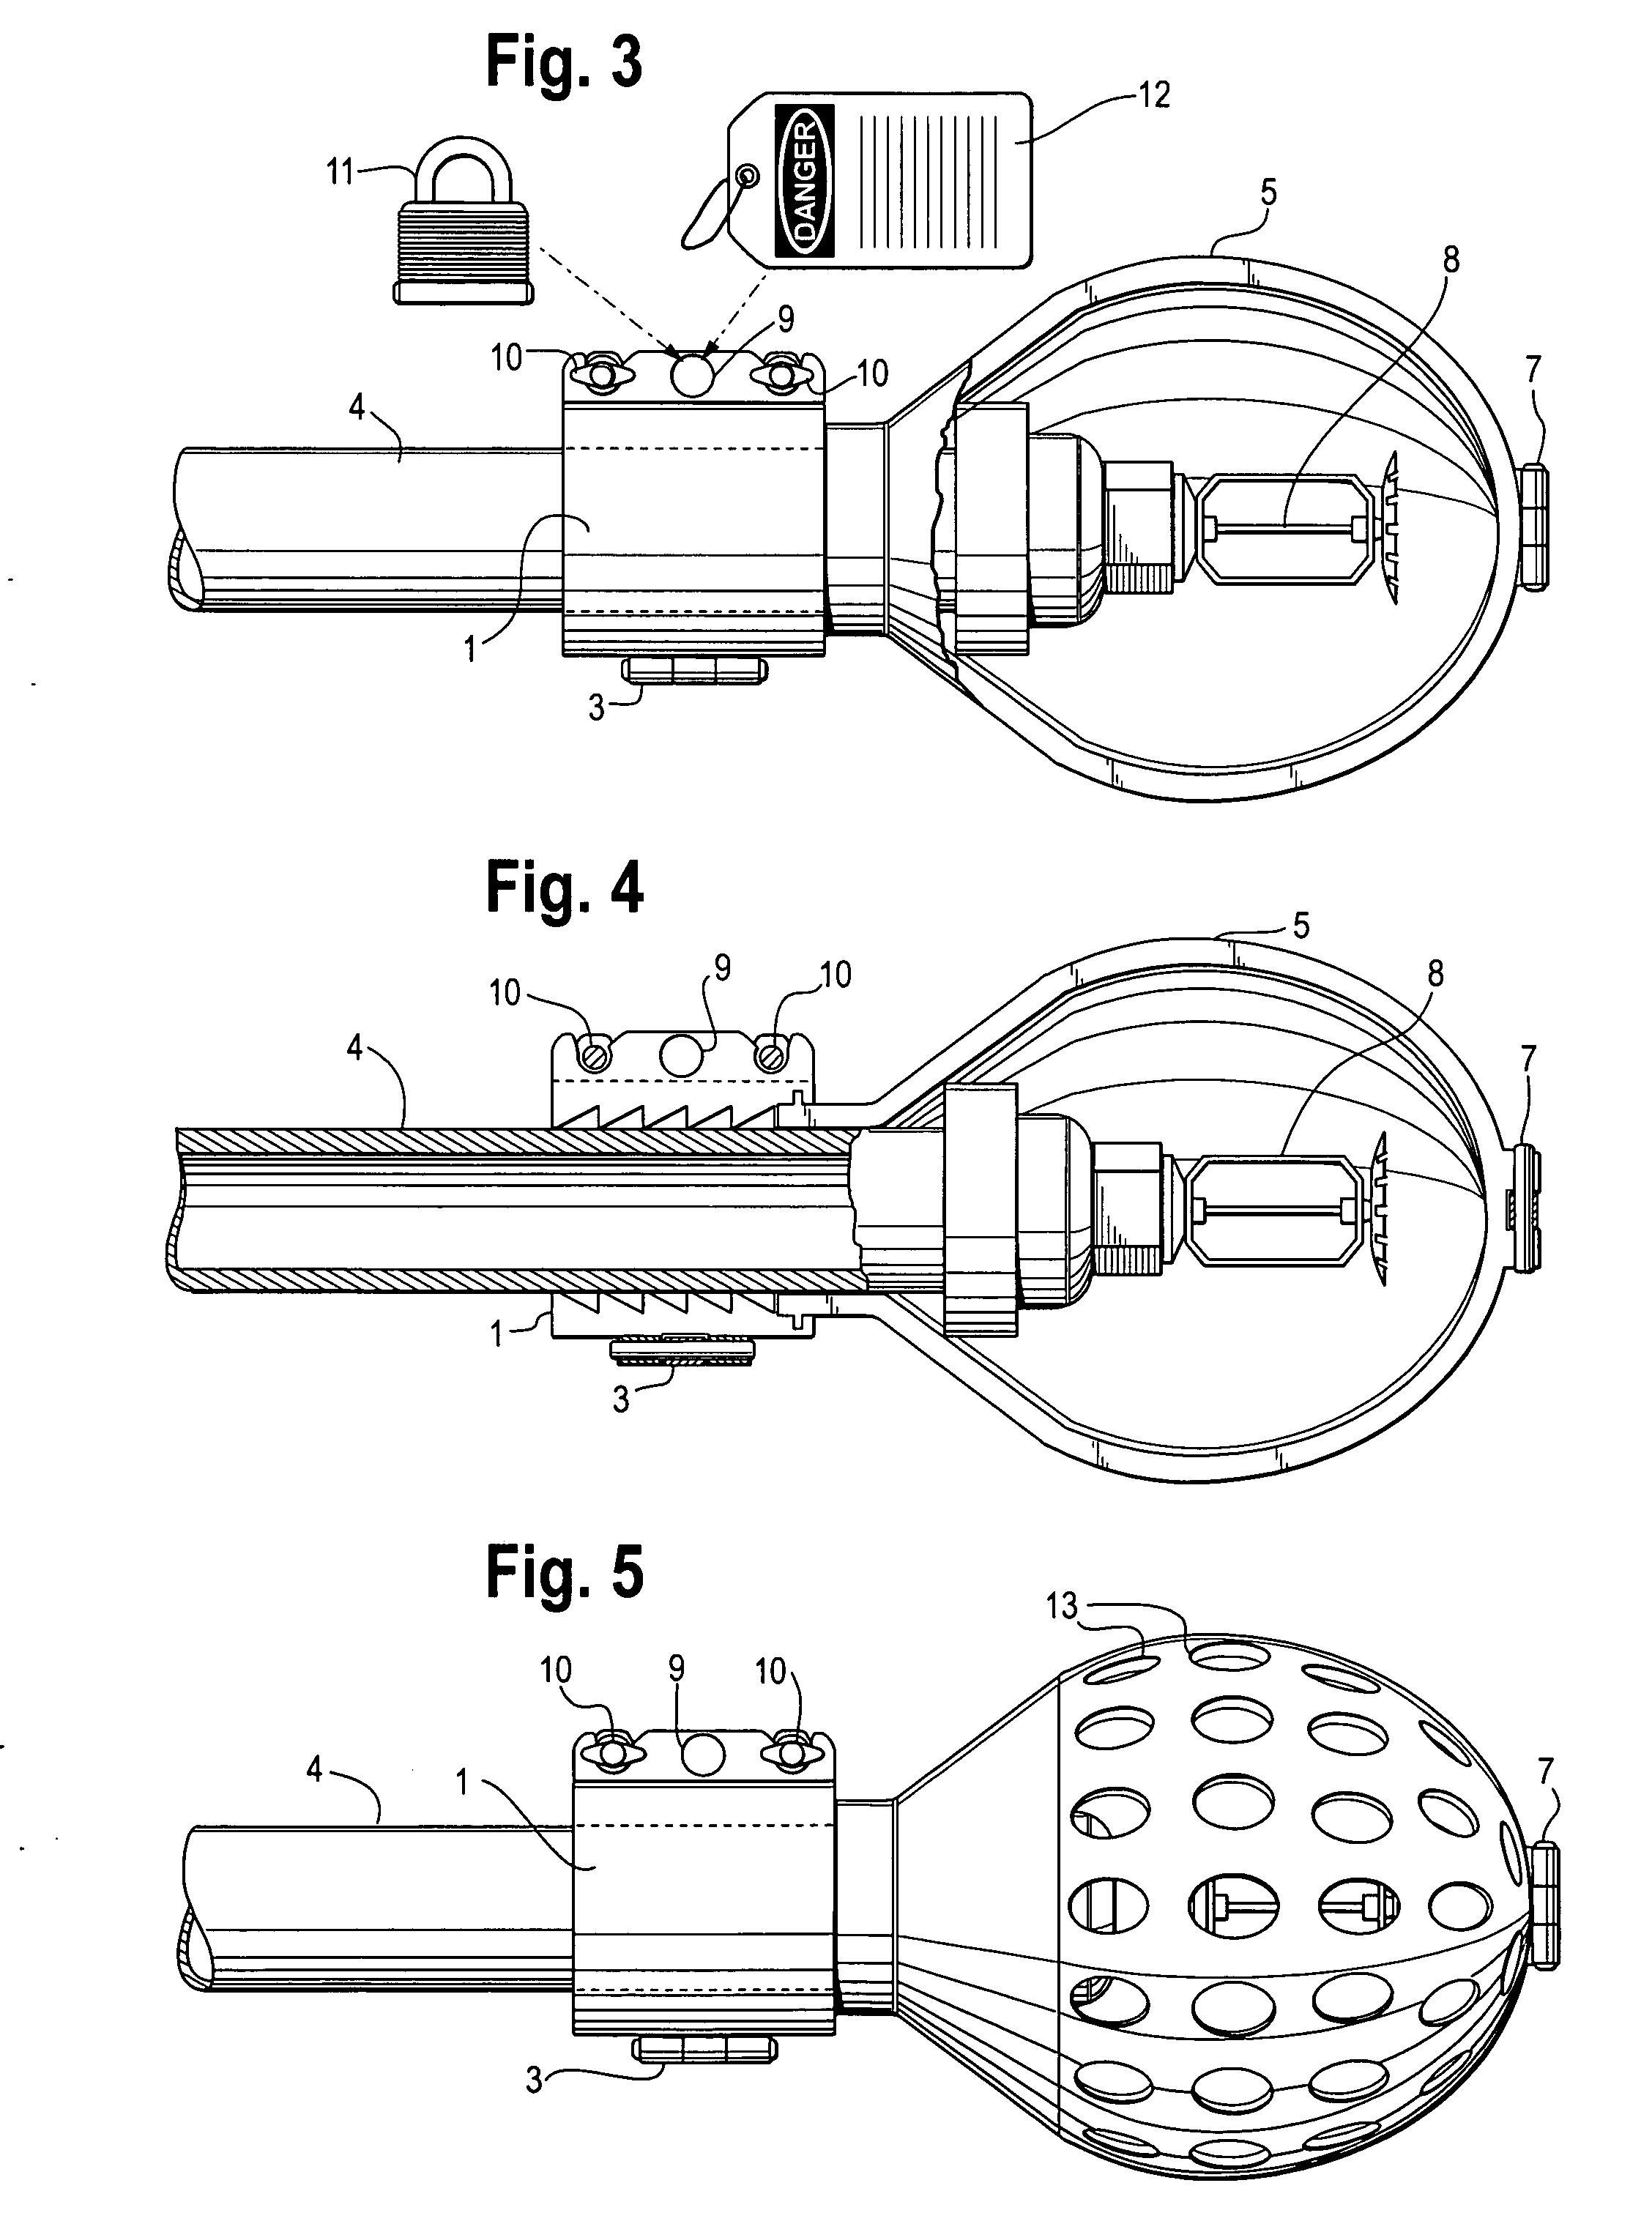 Method and apparatus for lock out-tag out of sprinkler heads